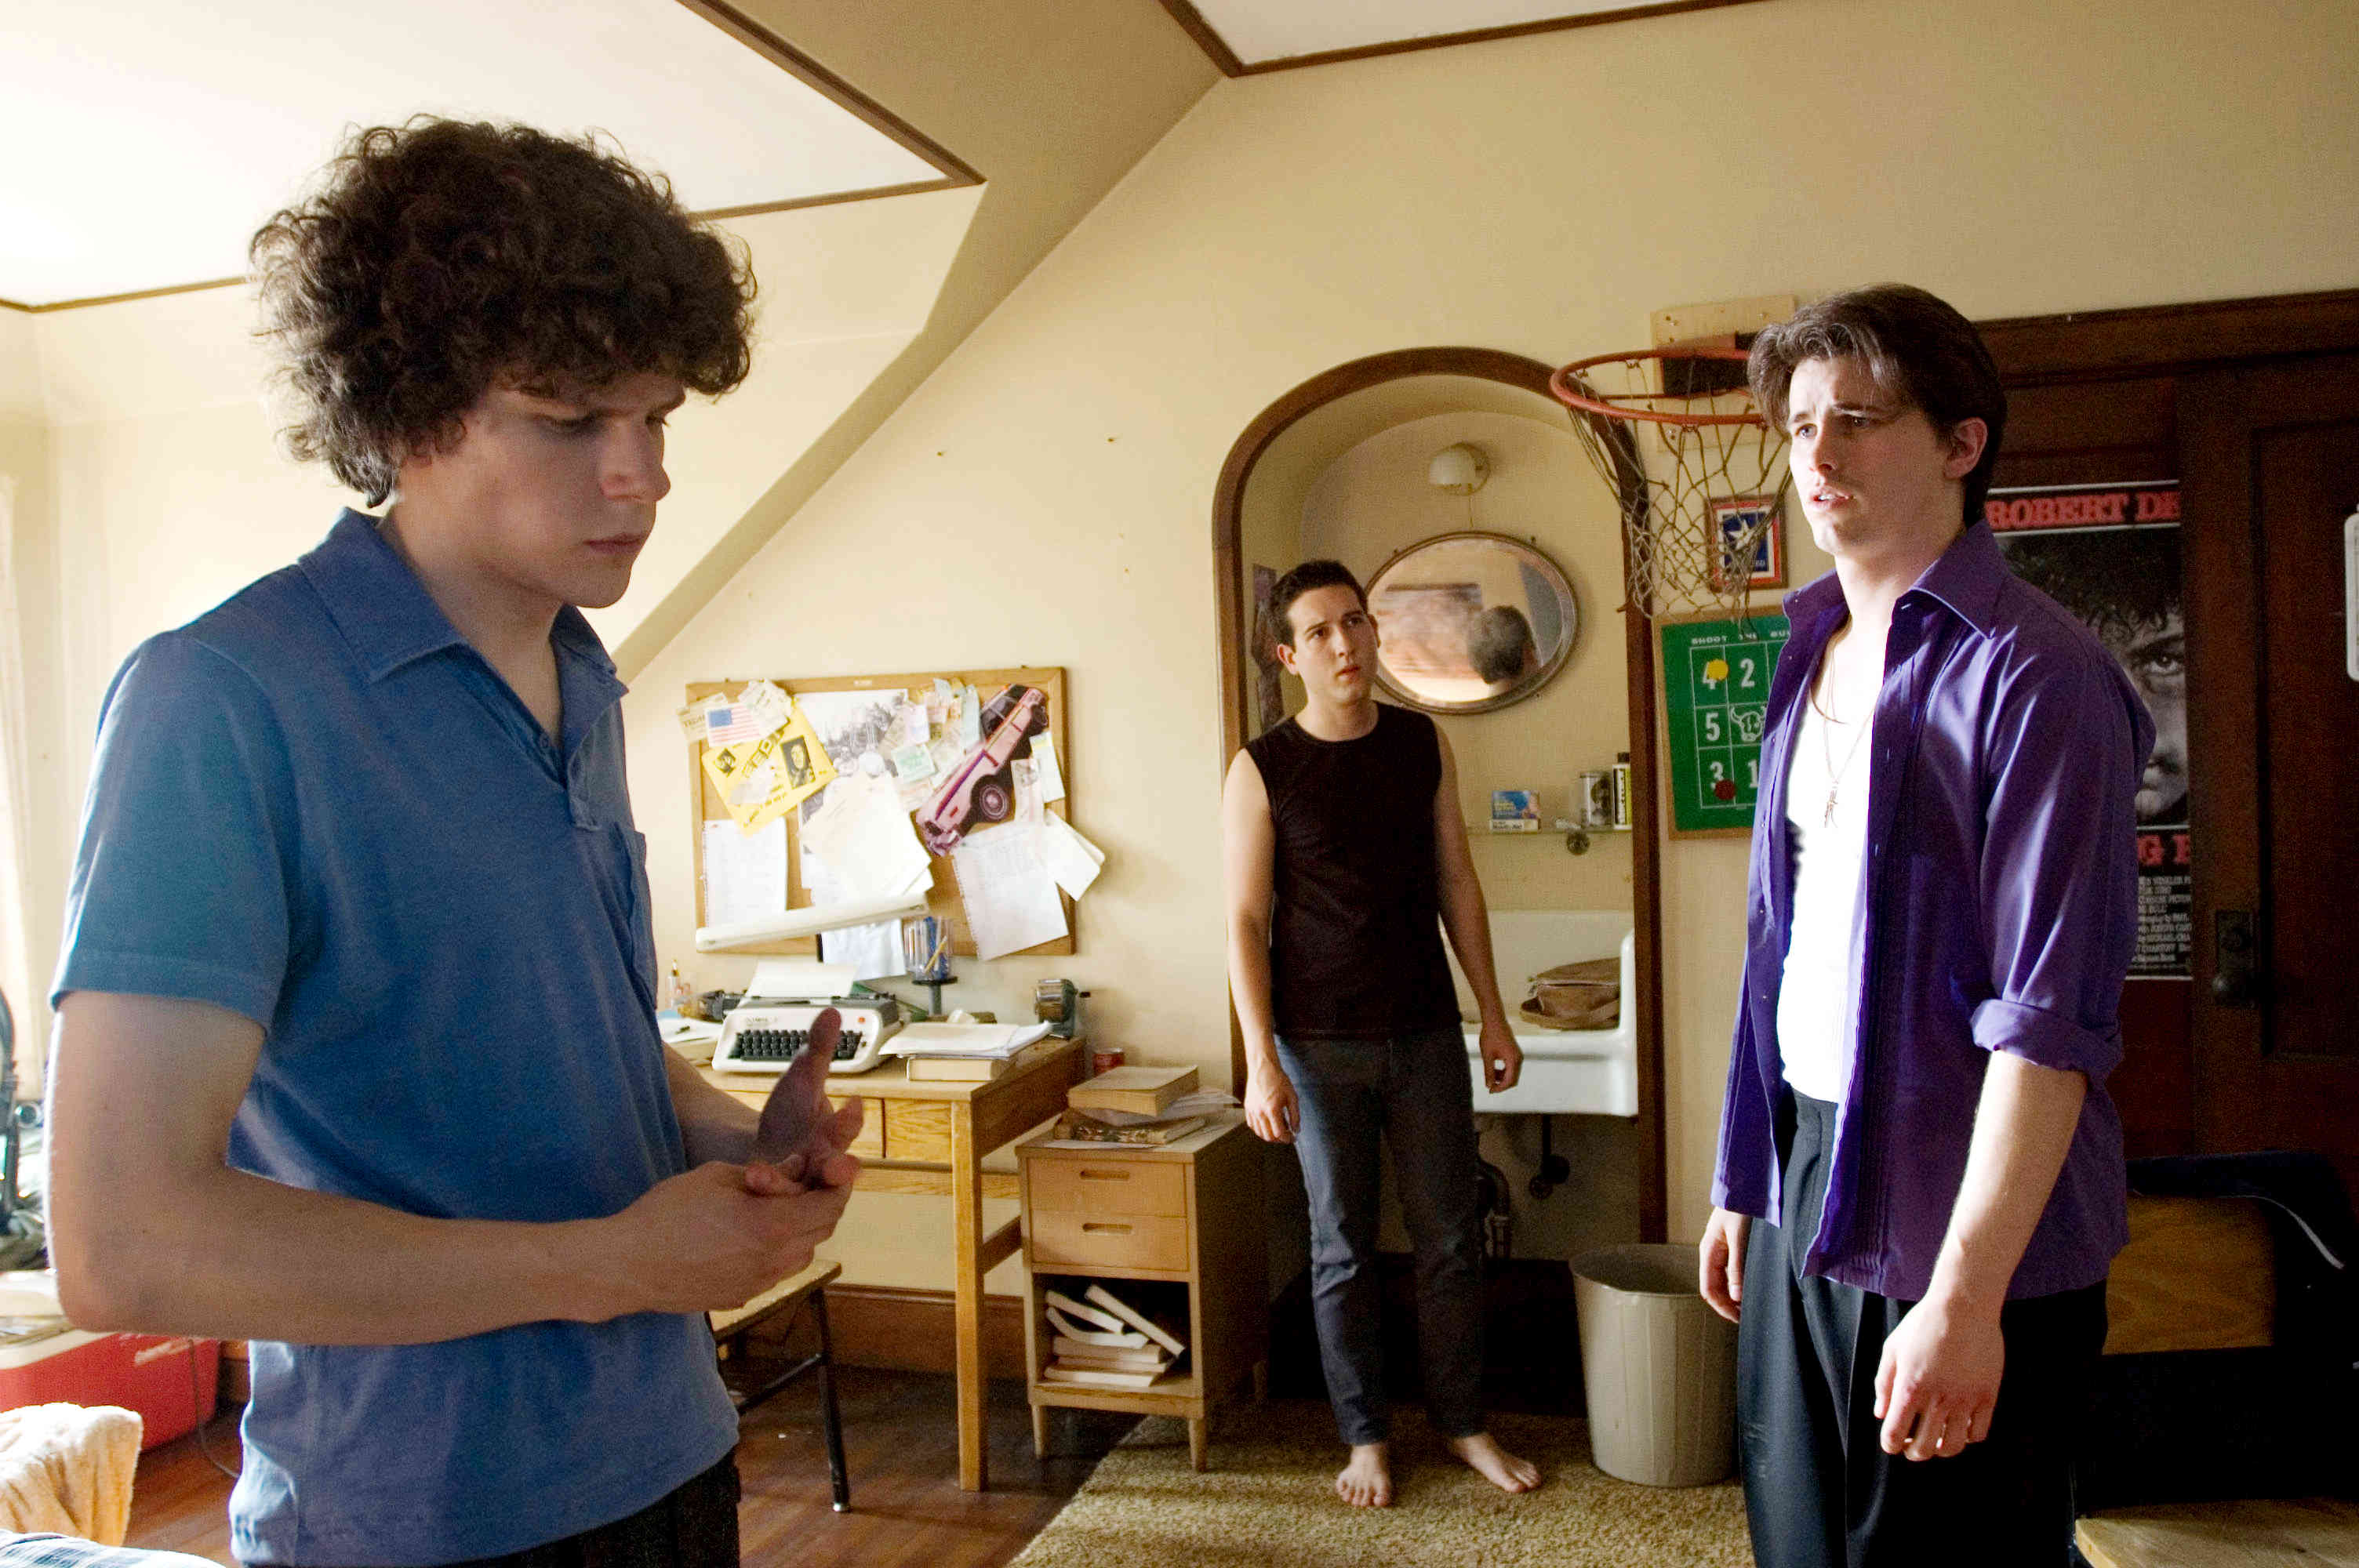 Jesse Eisenberg, Christopher Marquette and Jason Ritter in Anchor Bay Entertainment's The Education of Charlie Banks (2009)